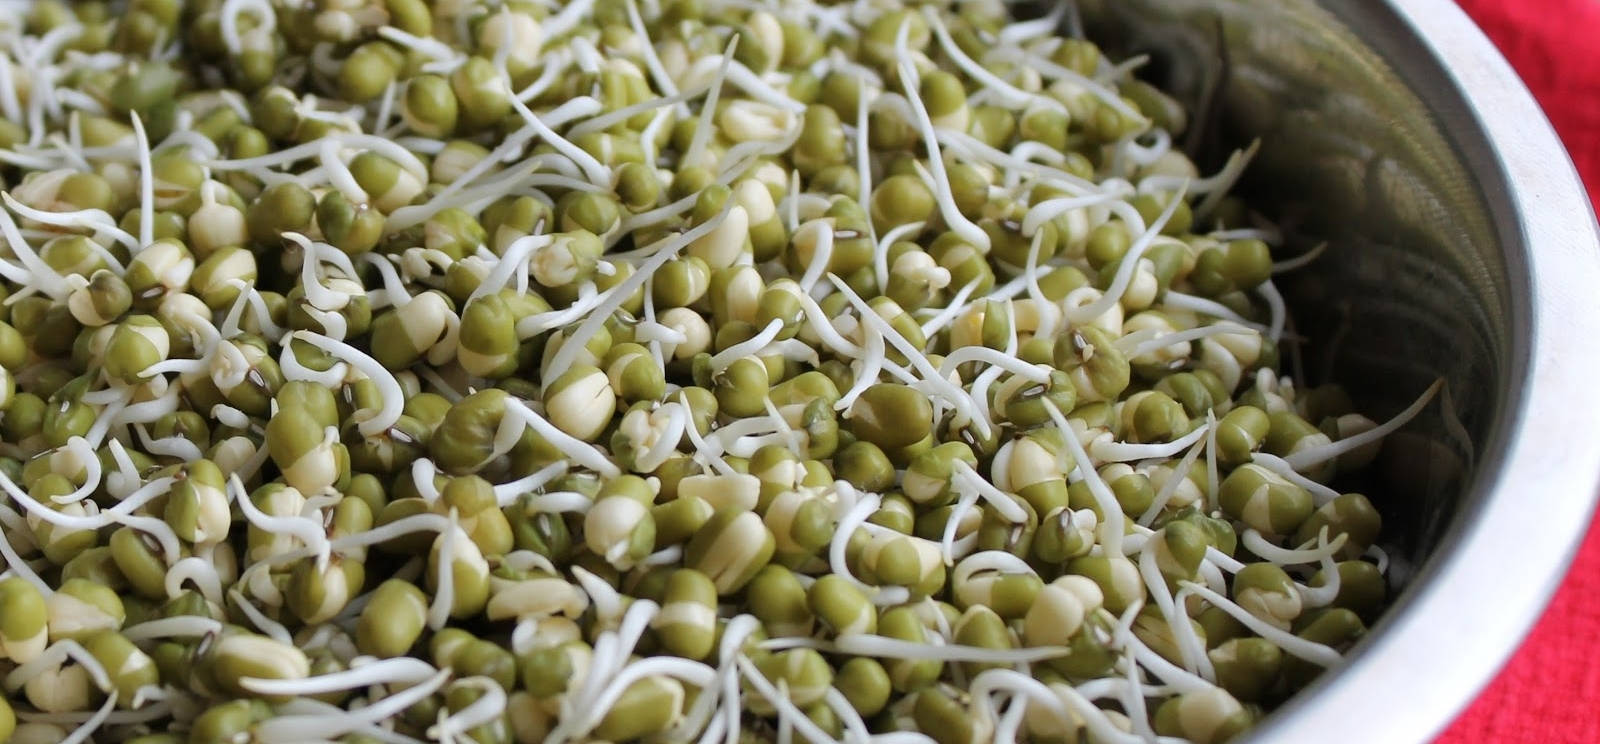 Organic Green Bean Sprouts Vegetable Picture